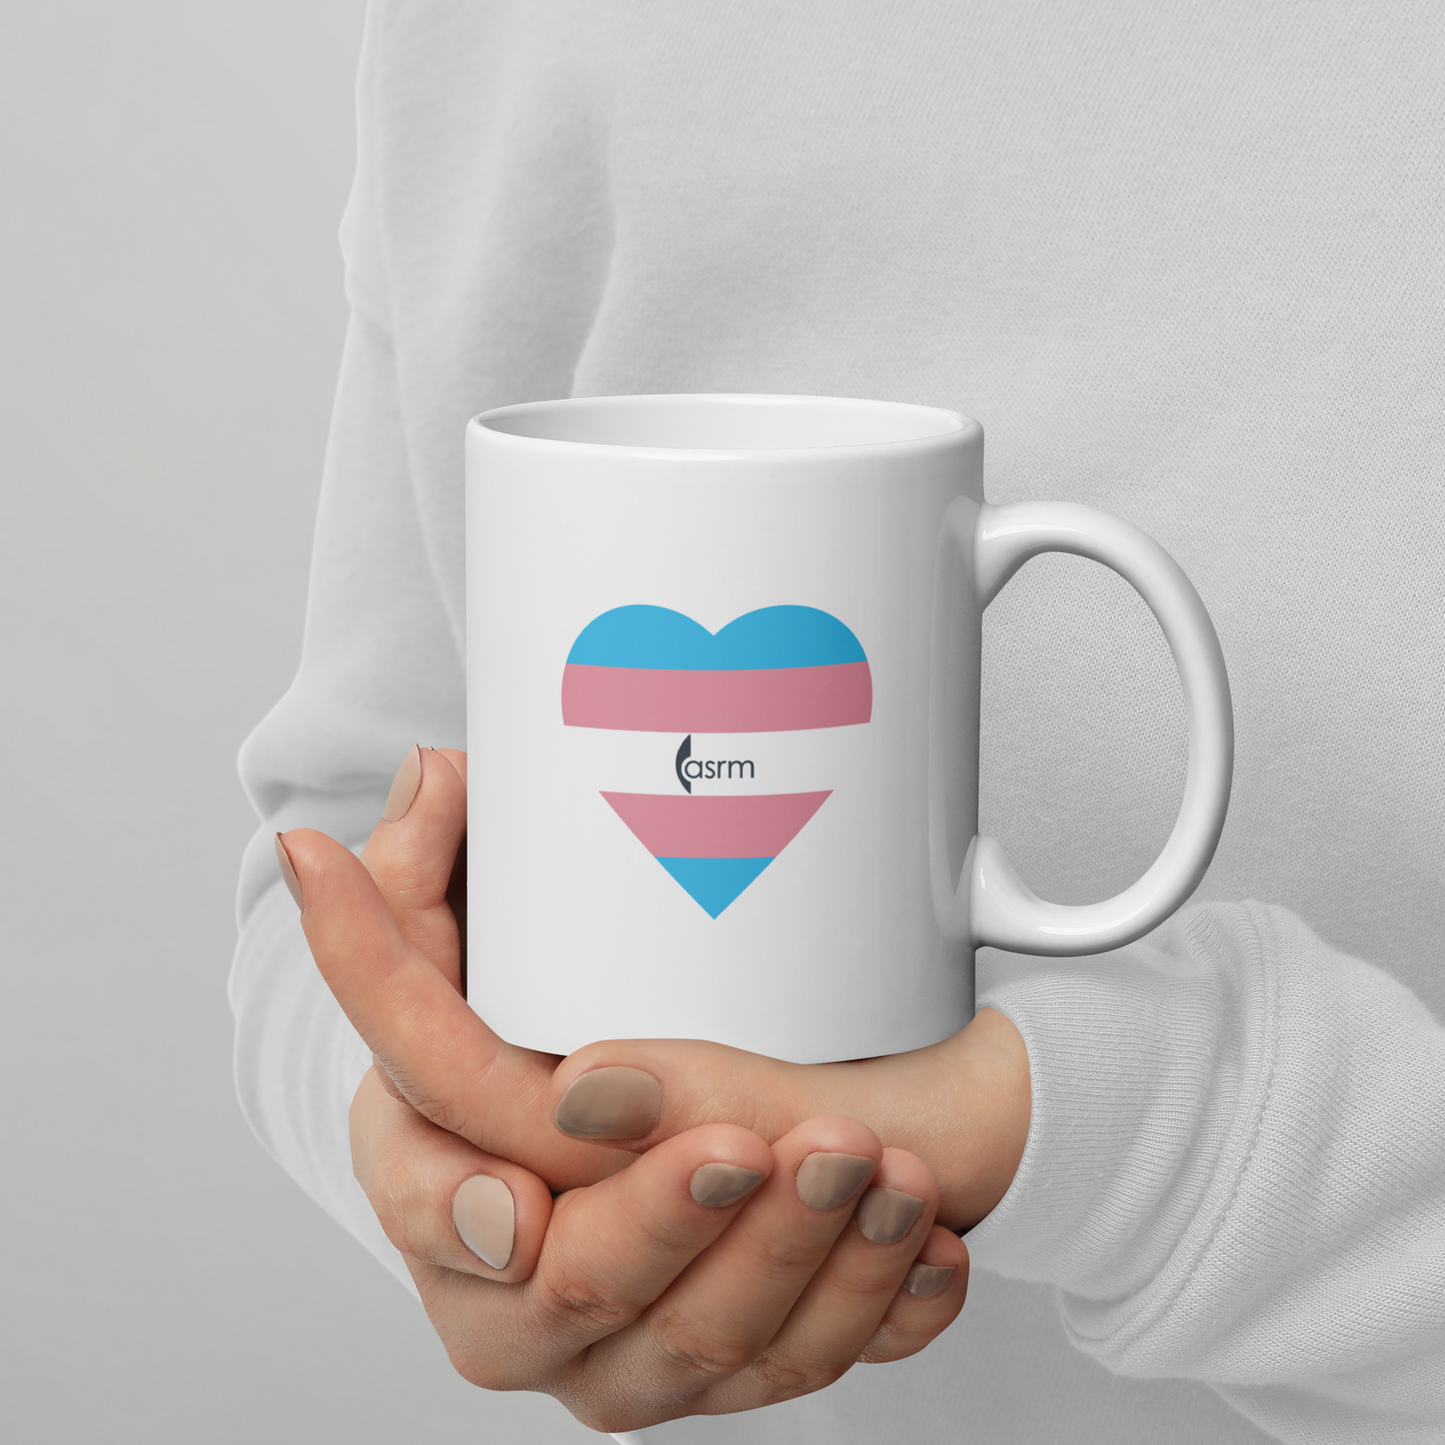 Trans Care is Health Care White Glossy Mug Modeled Handle Right